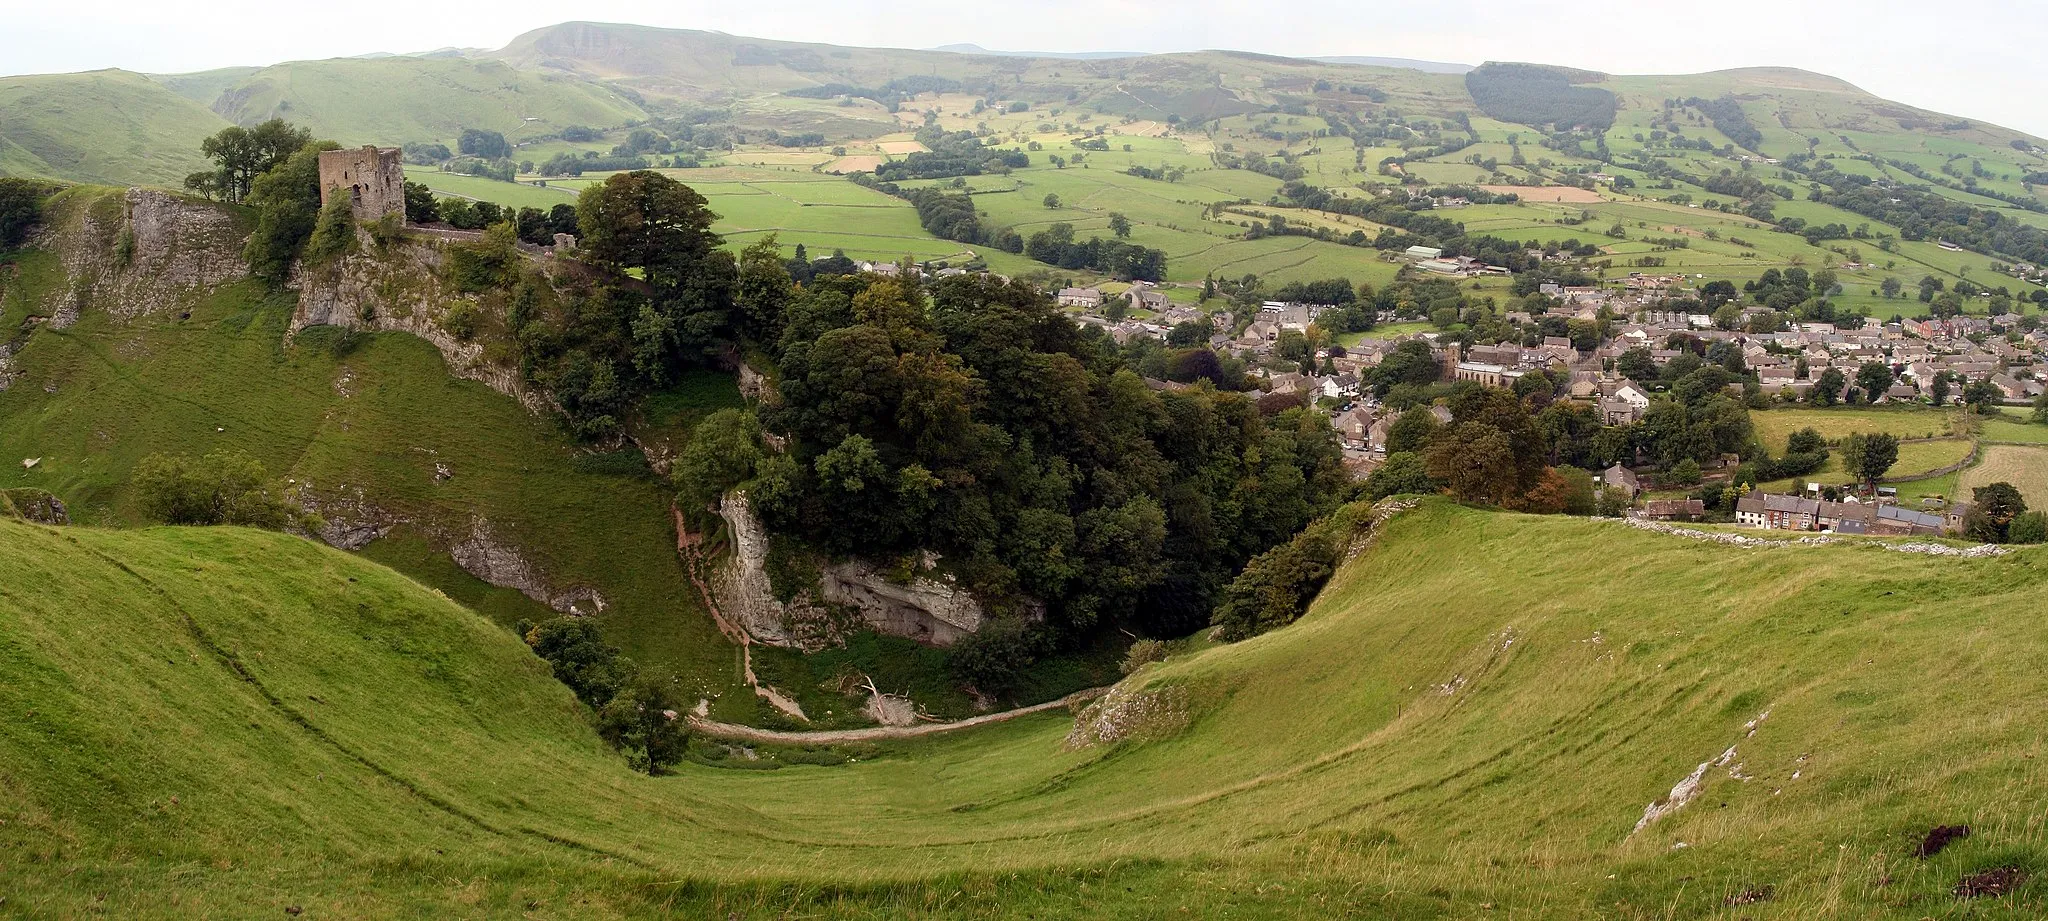 Photo showing: Peveril Castle standing above the of Castleton in Derbyshire.